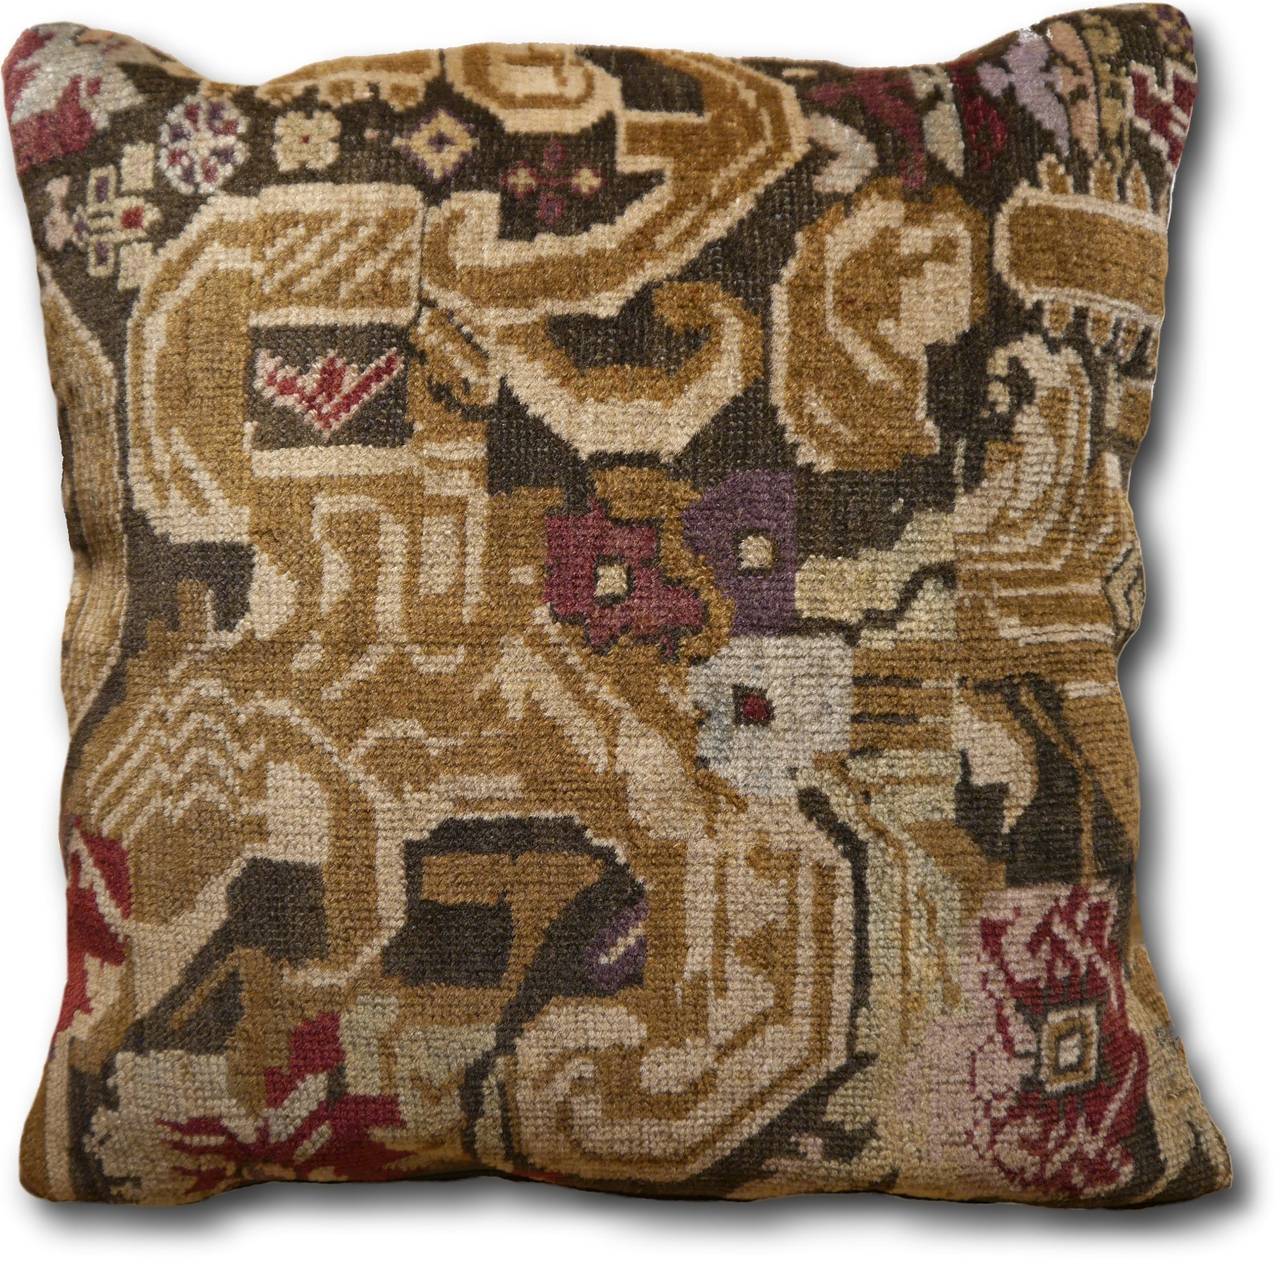 Exquisite European Bessarabian antique rug pillow. Perfect condition. Wool pile and wool foundation, backing 100% cotton. Comes with zipper and filling 100% goose feathers. Backing, zipper and filling are new. Three more pillows in same size and